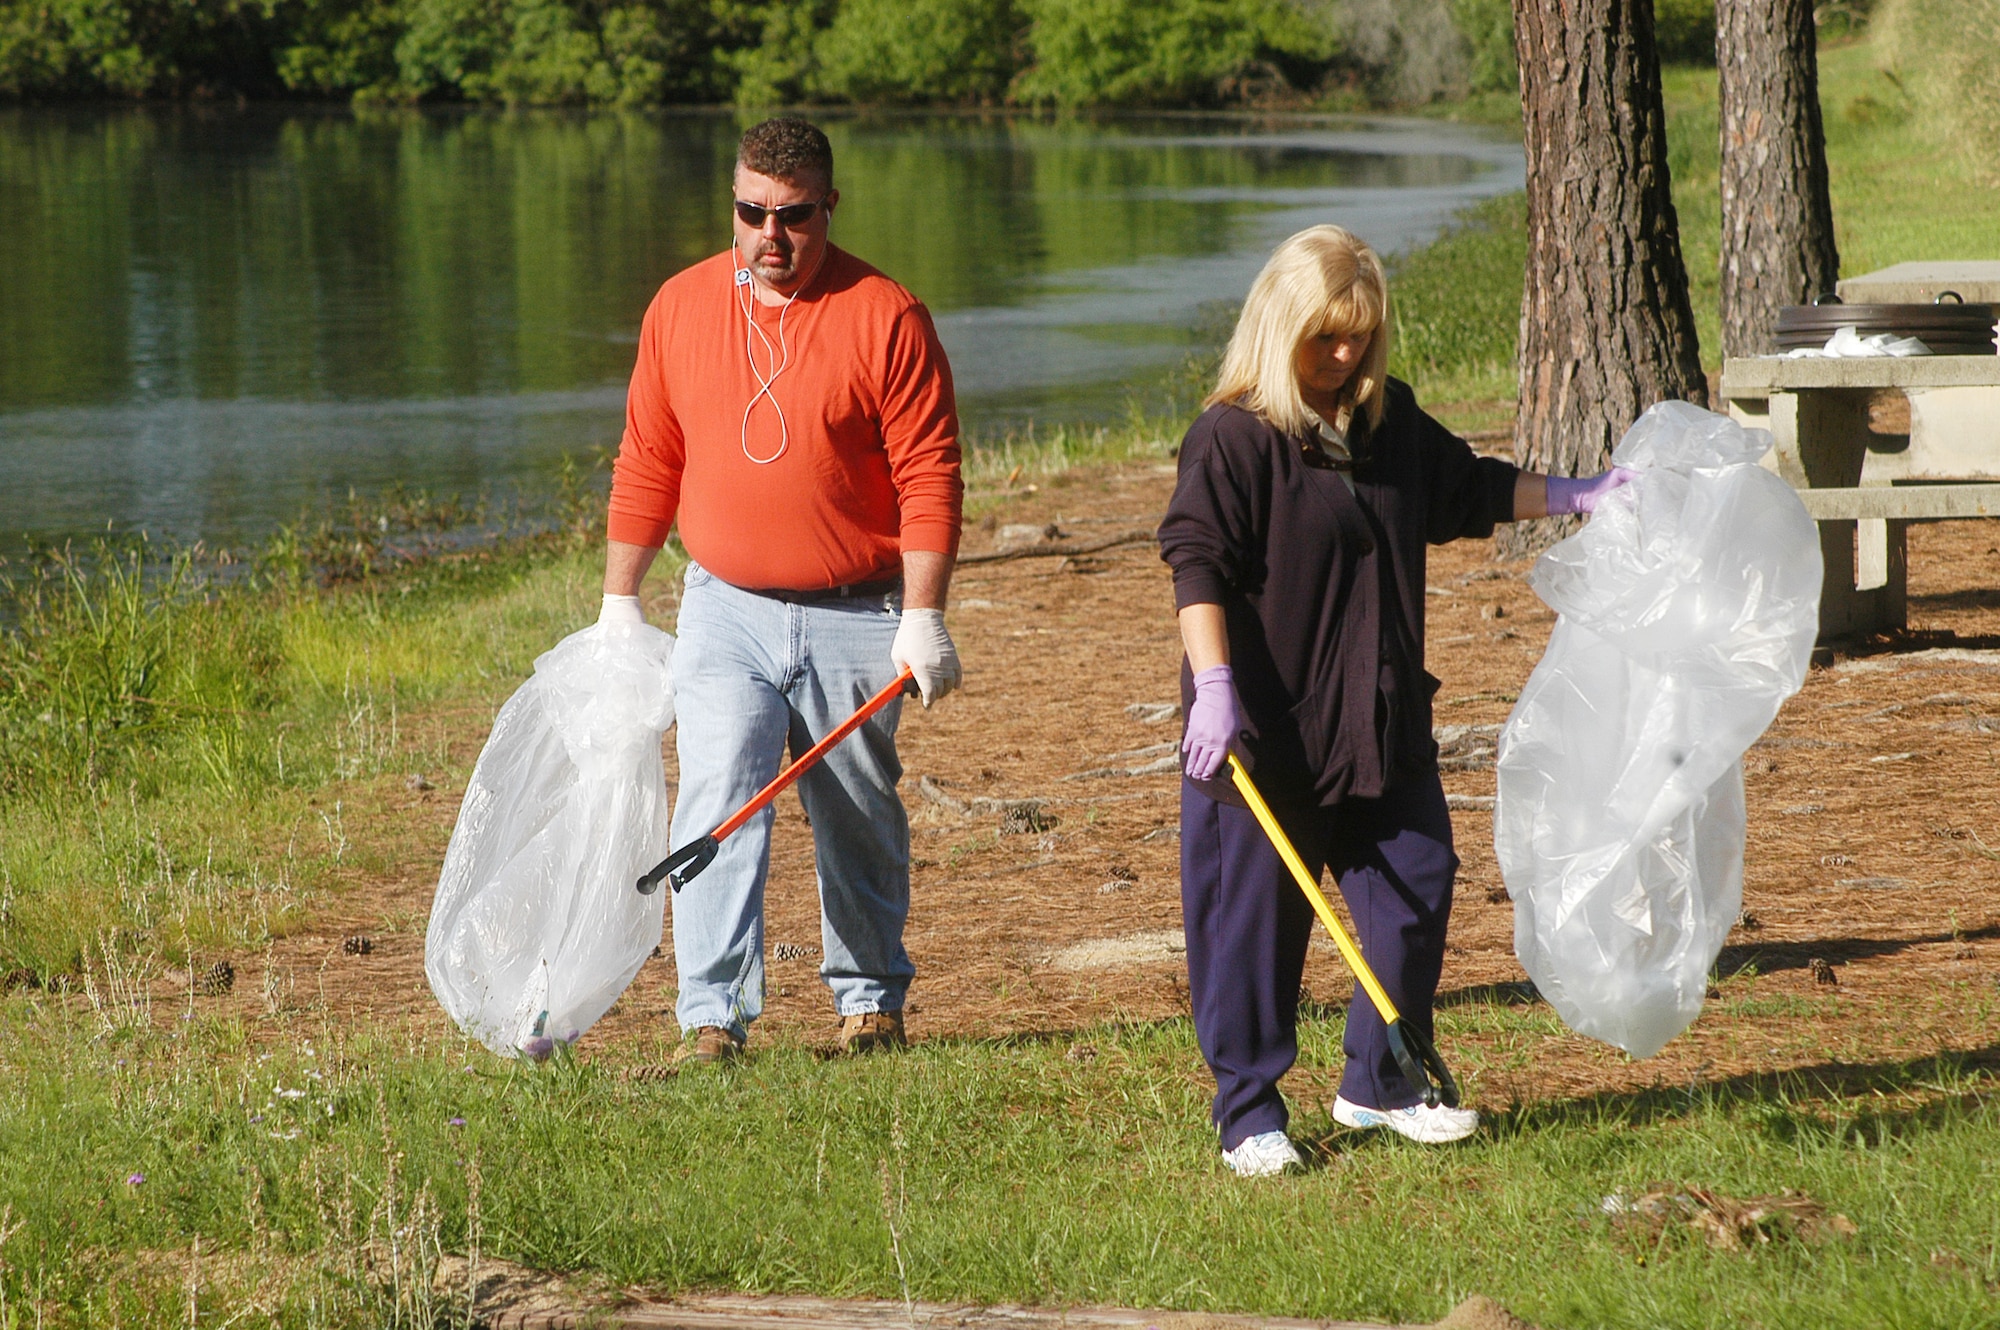 Griff Cox and Nita Crump, 78th Civil Engineer Group, pick up trash and debris around Scout Lake Wednesday. The clean-up was part of the Robins Air Force Base Earth Day Celebration events. (U. S. Air Force photo by Sue Sapp)